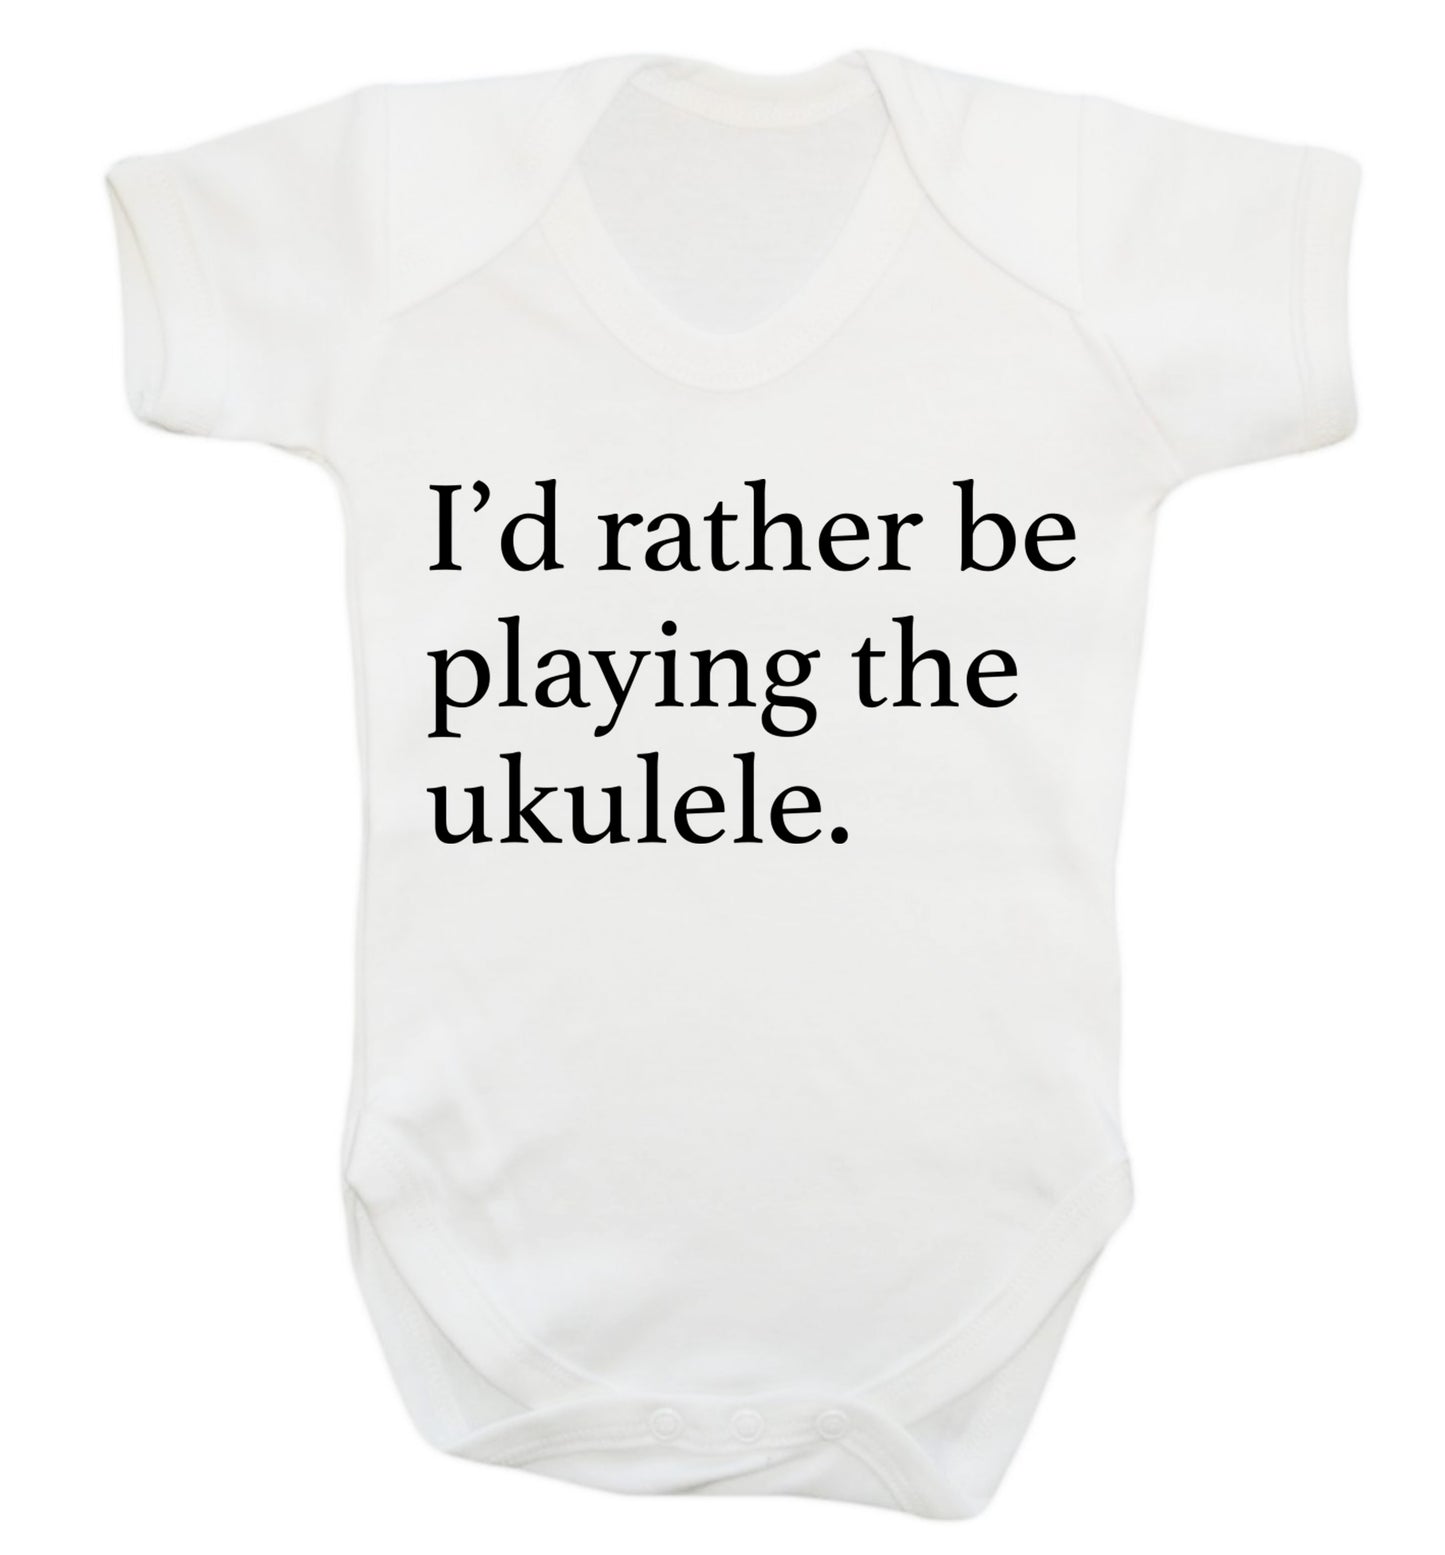 I'd rather by playing the ukulele Baby Vest white 18-24 months